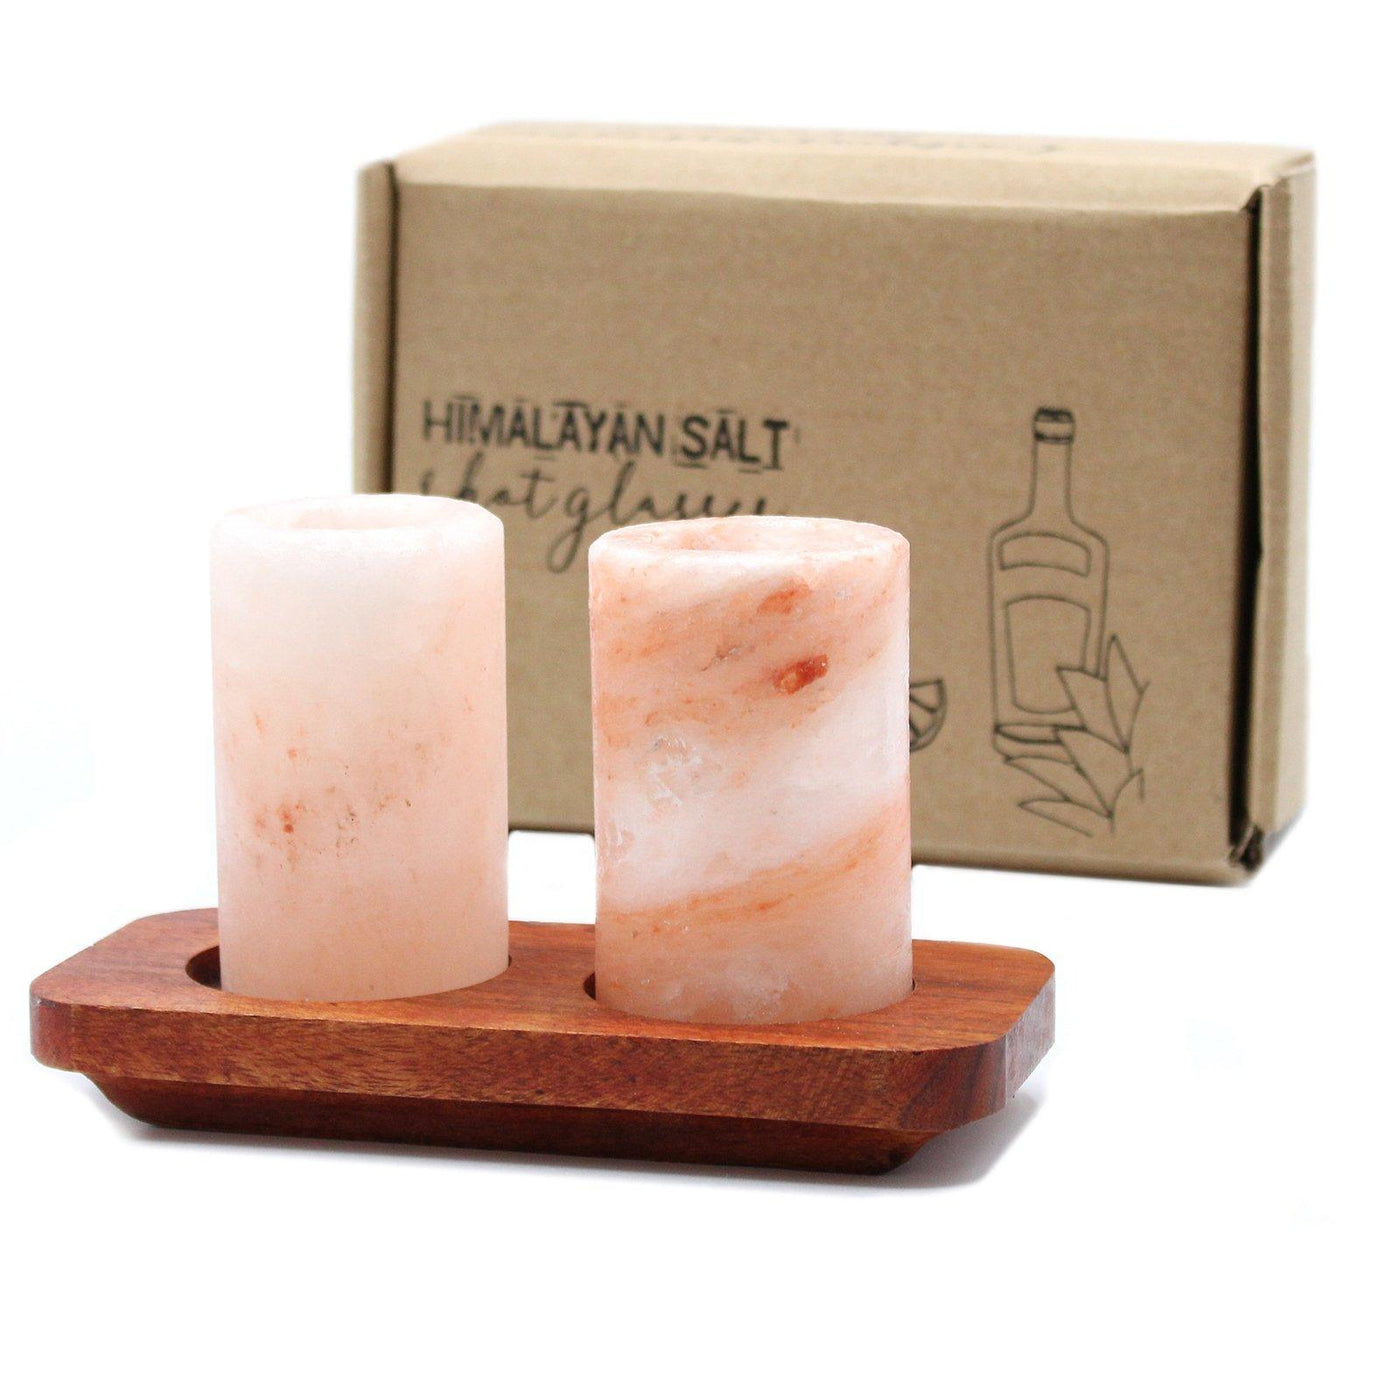 Set Of 2 Himalayan Salt Shot Glasses With Wooden Serving Tray.